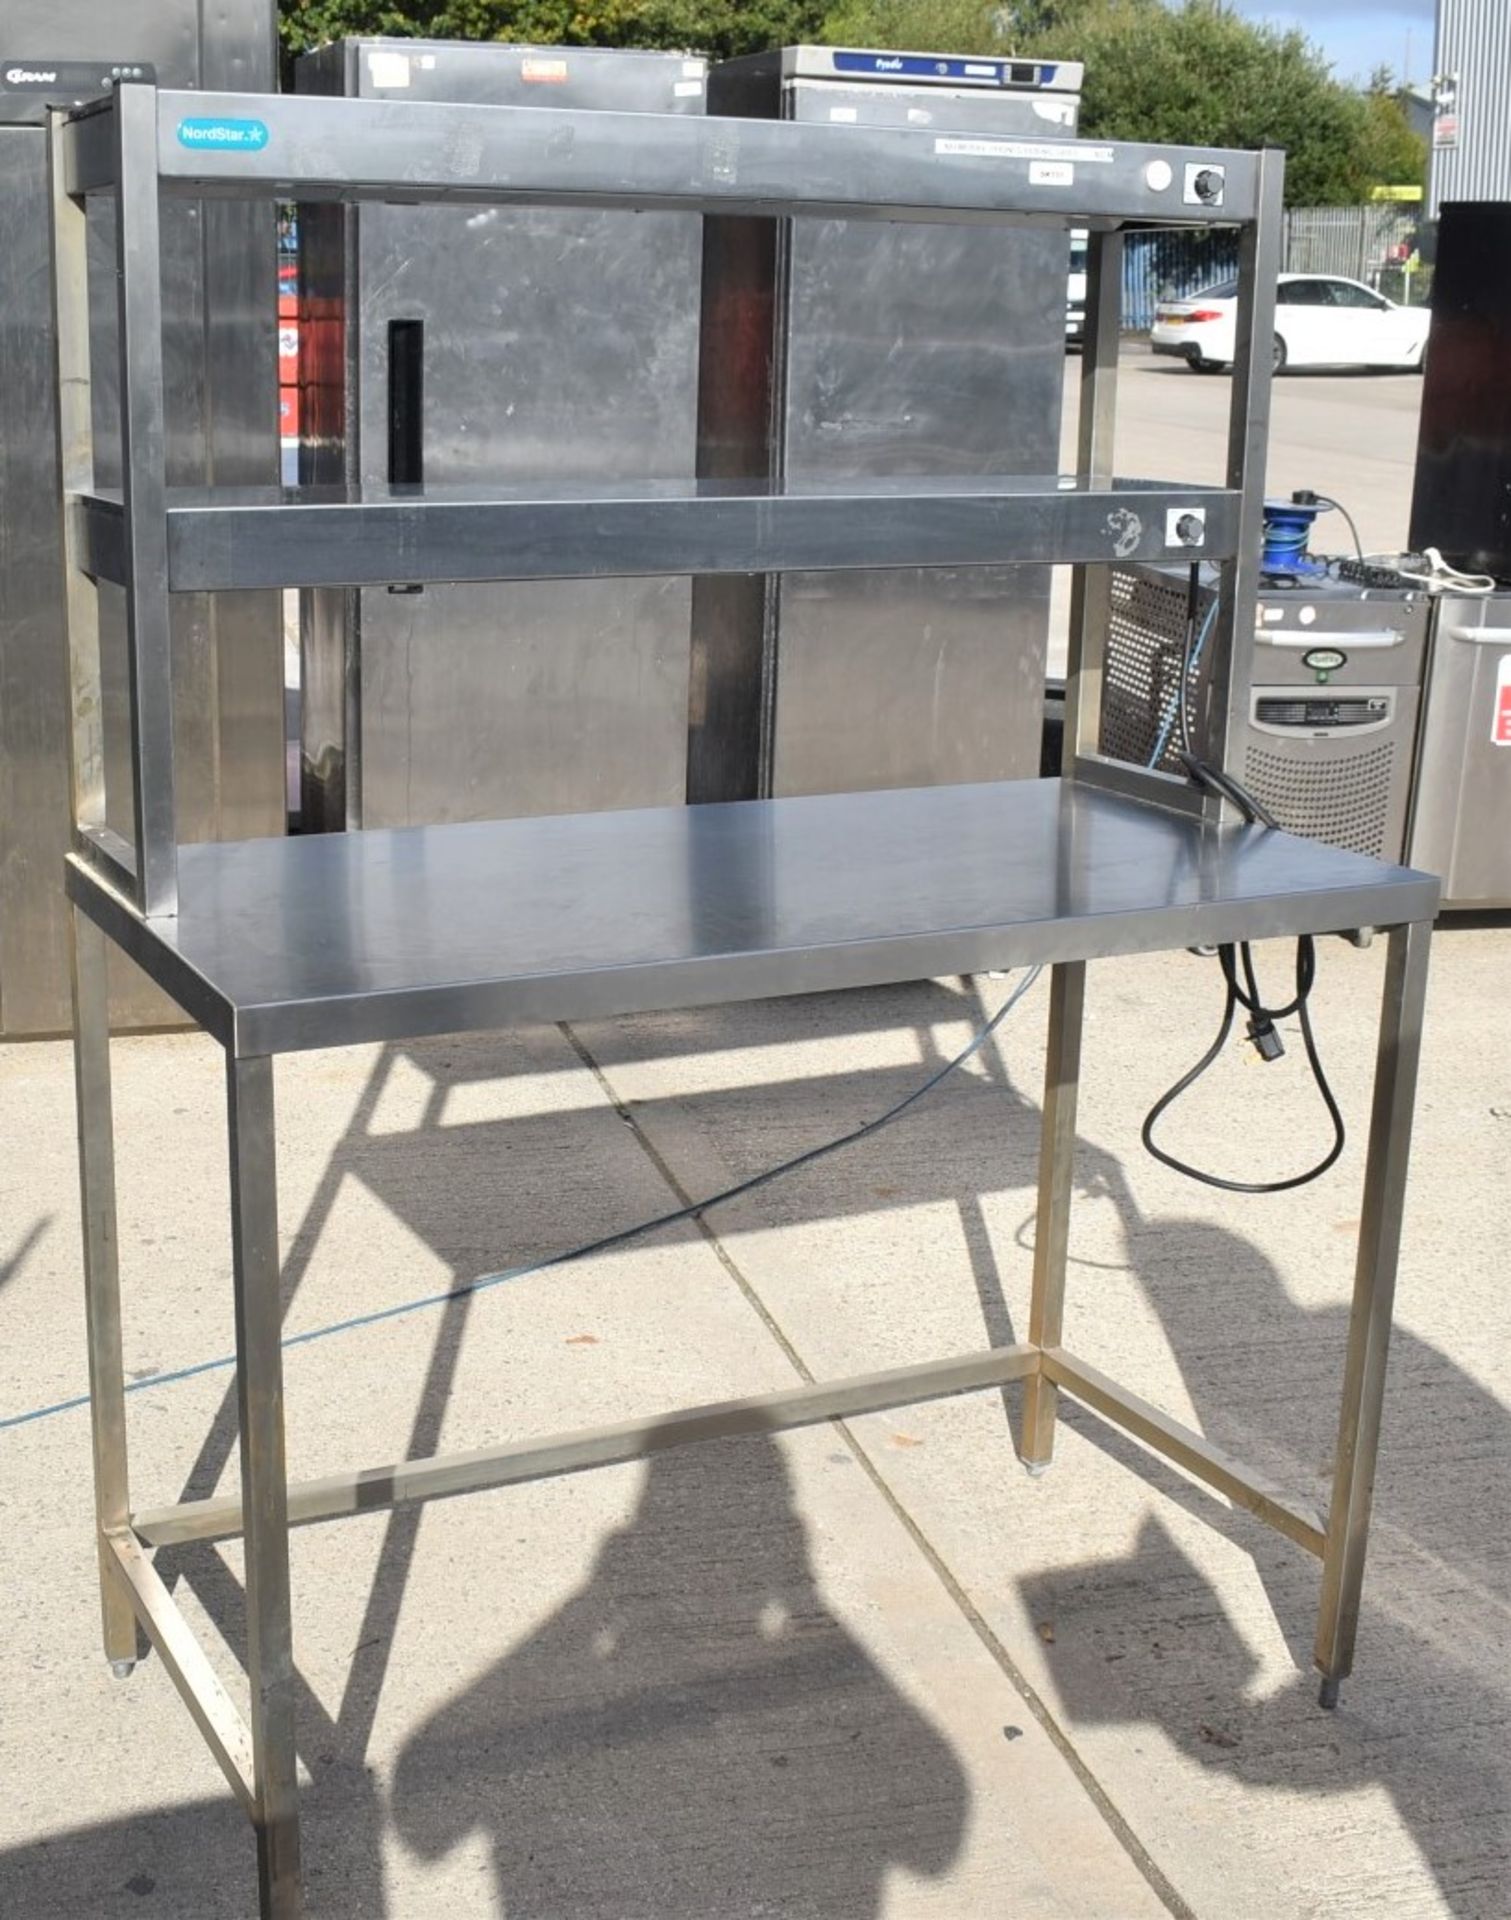 1 x Heated Passthrough Gantry Prep Table With Two Shelves and Adjustable Heat Controls